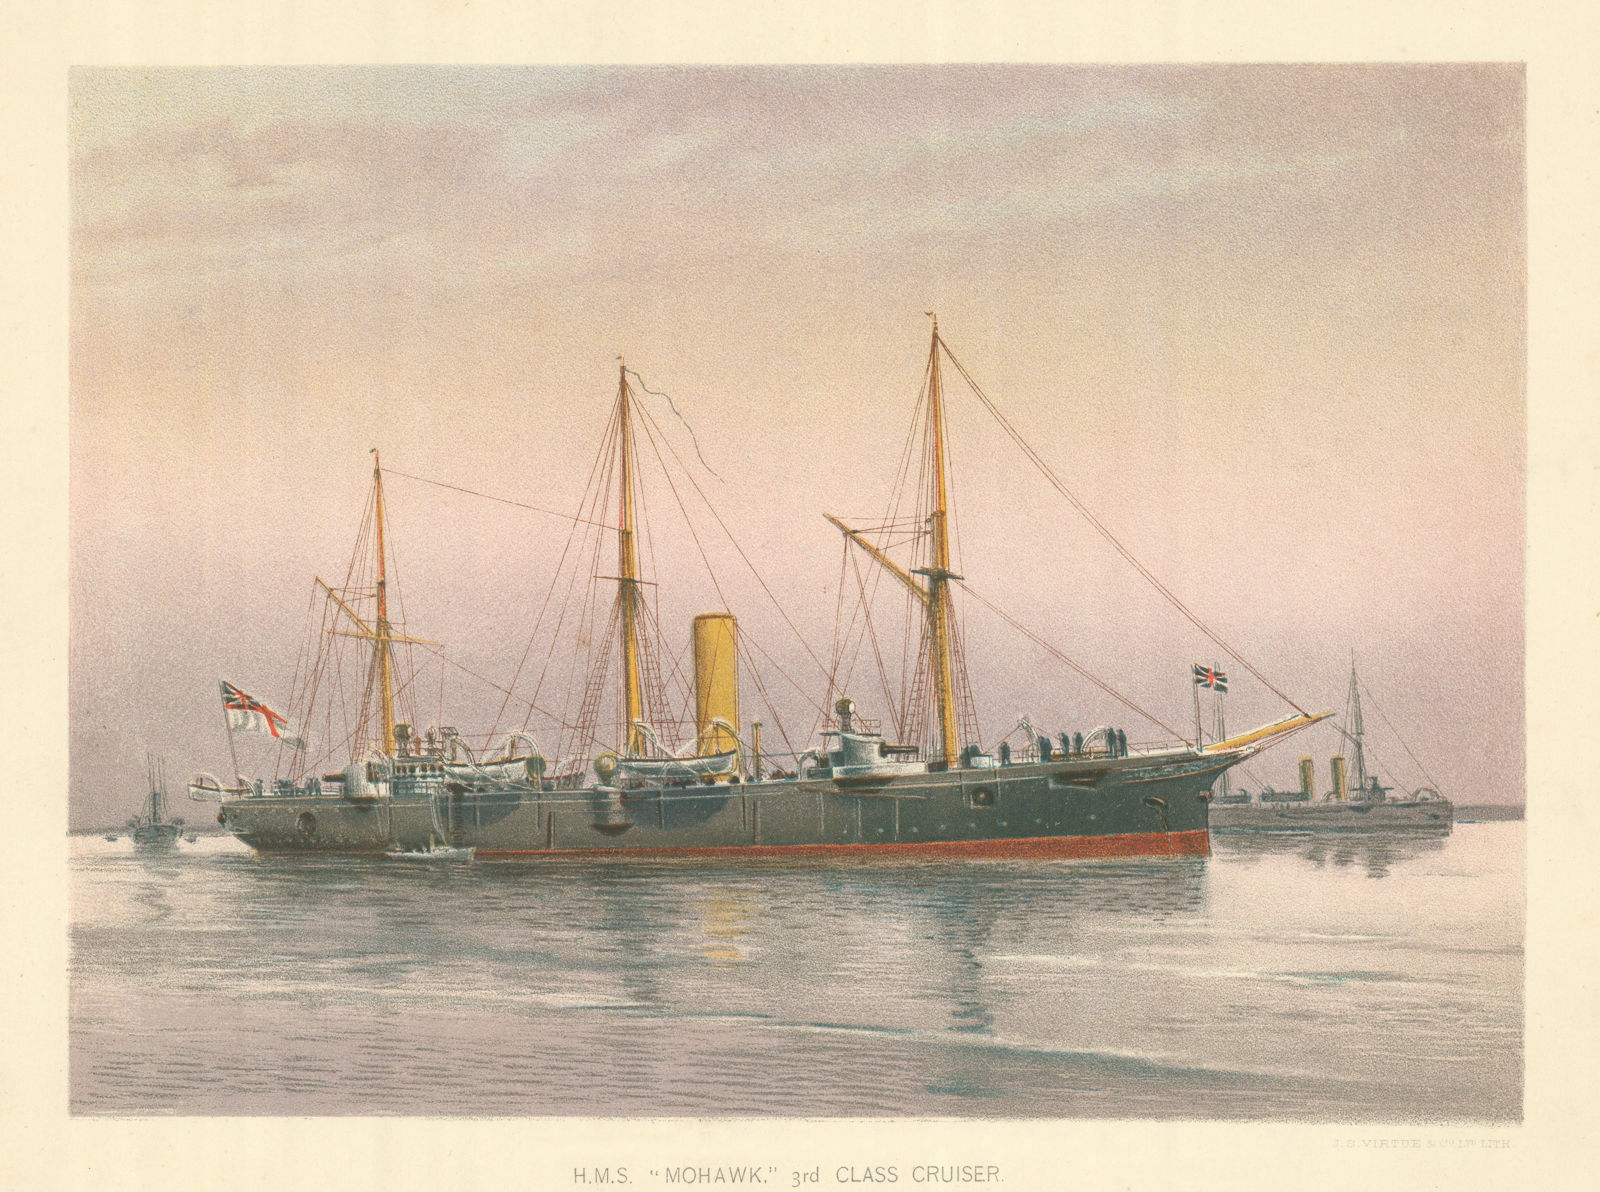 Associate Product H.M.S. "Mohawk" - 3rd class cruiser (1886) by W.F. Mitchell. Royal Navy 1893